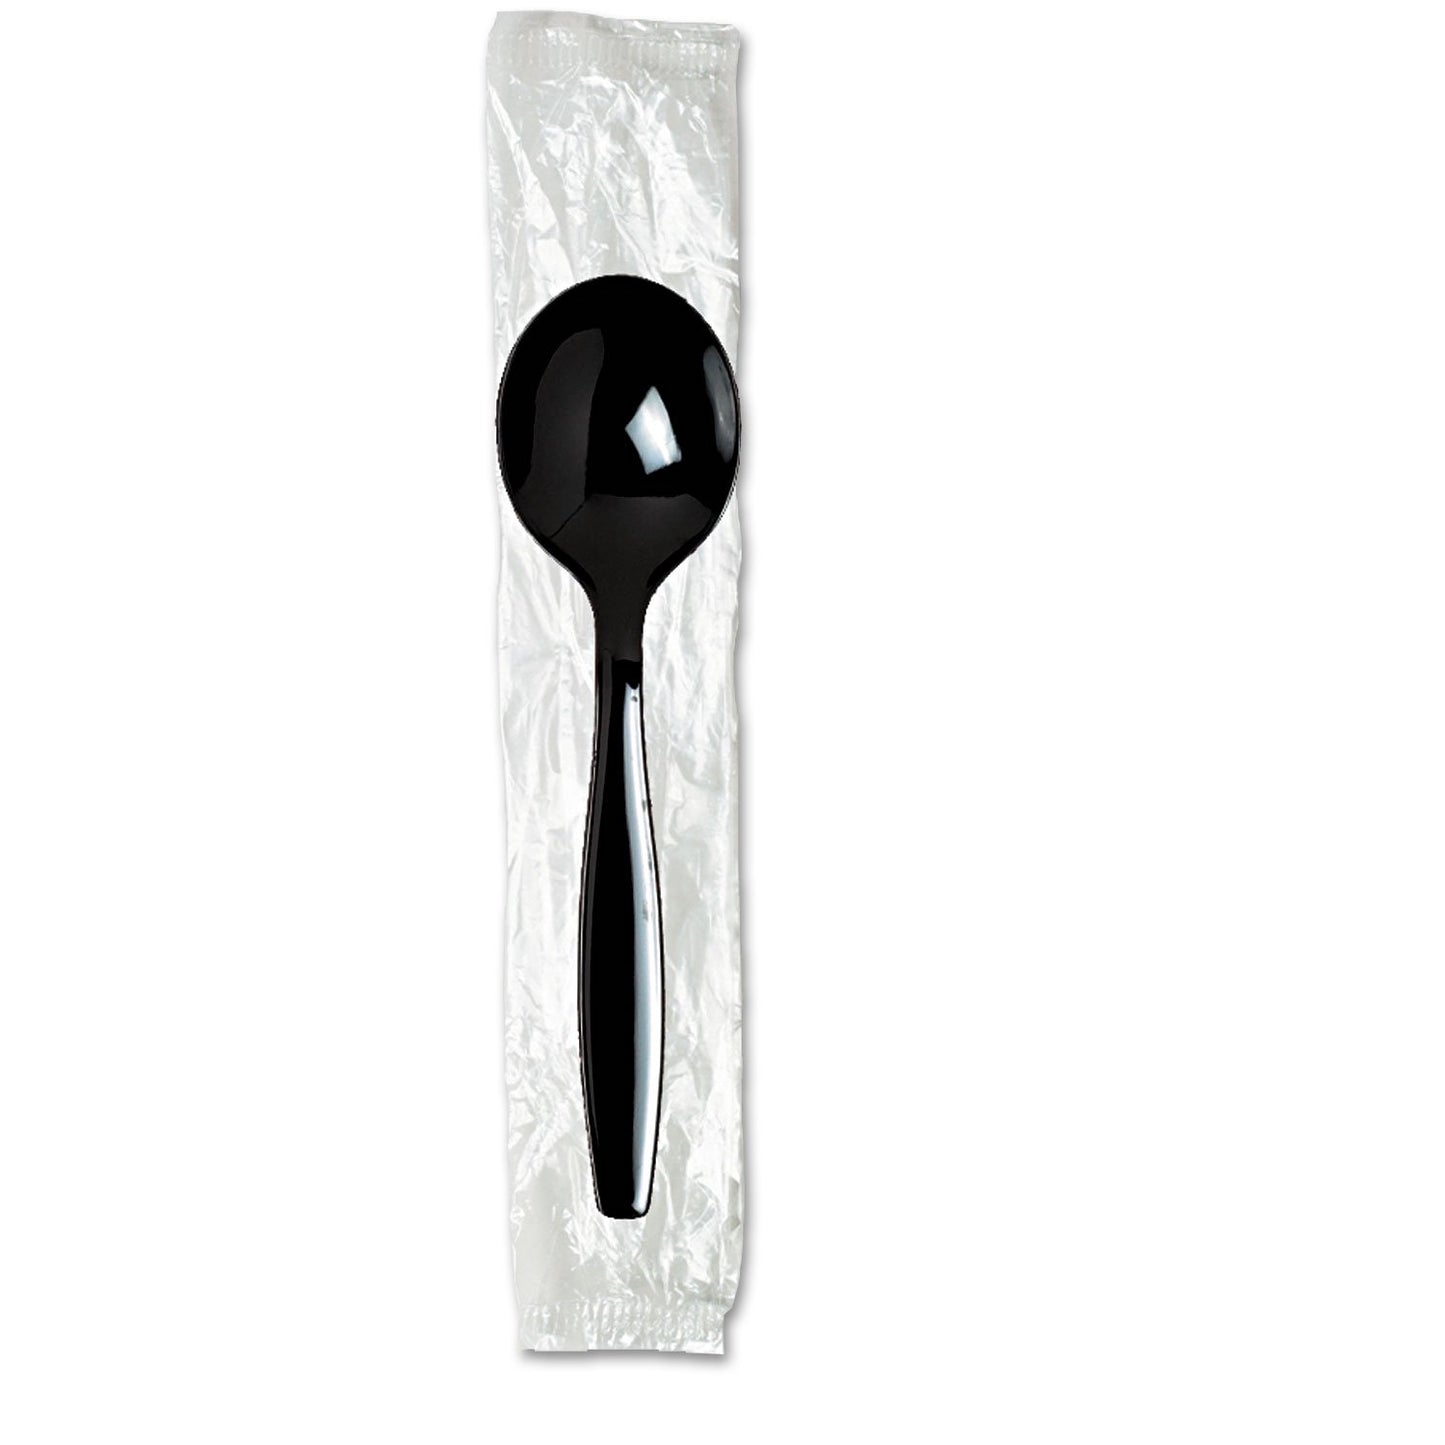 Case of Plastic - Disposable - Individually Wrapped - Heavy Weight - Black Soup Spoon| 1000 ct.  Nicole Fantini   